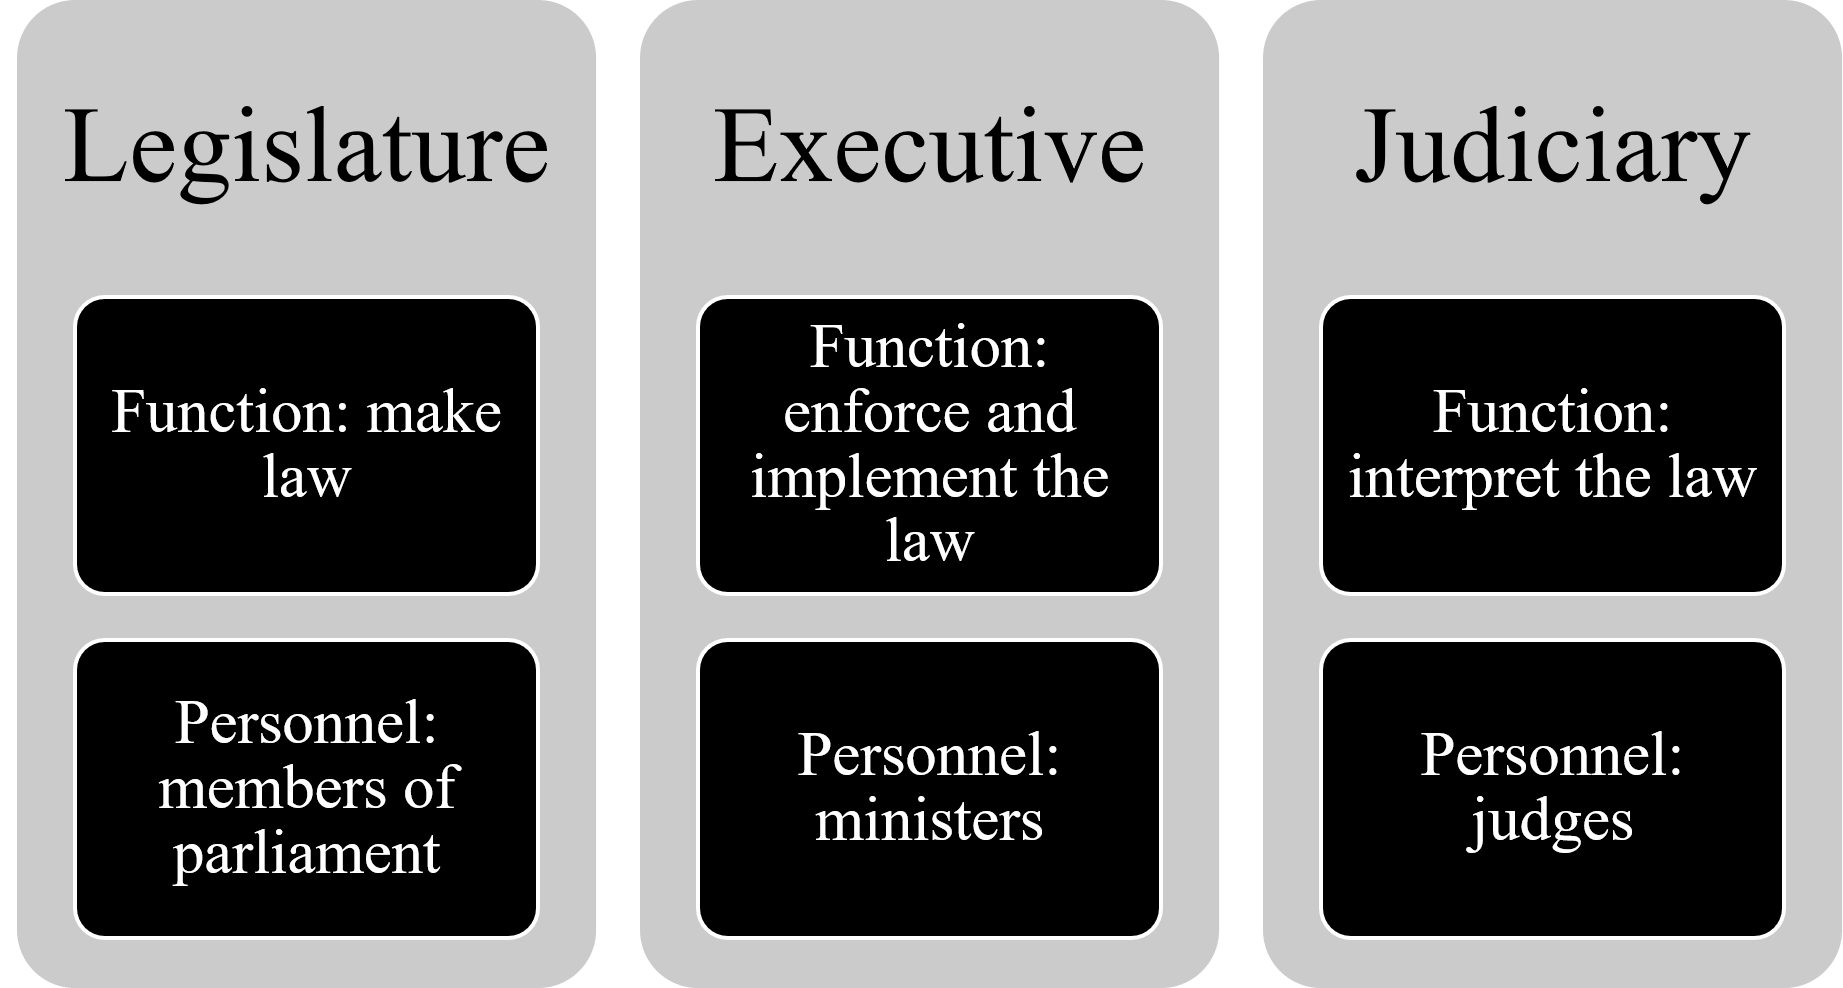 The following block list diagram illustrates the separation of powers doctrine as applicable to each arm of state.The first arm listed being the legislature whose function is to make law and whose personnel are members of parliament.The second arm listed being the executive whose function is to enforce and implement the law and whose personnel are ministers.The third arm listed being the judiciary whose function is to interpret the law and whose personnel are judges.